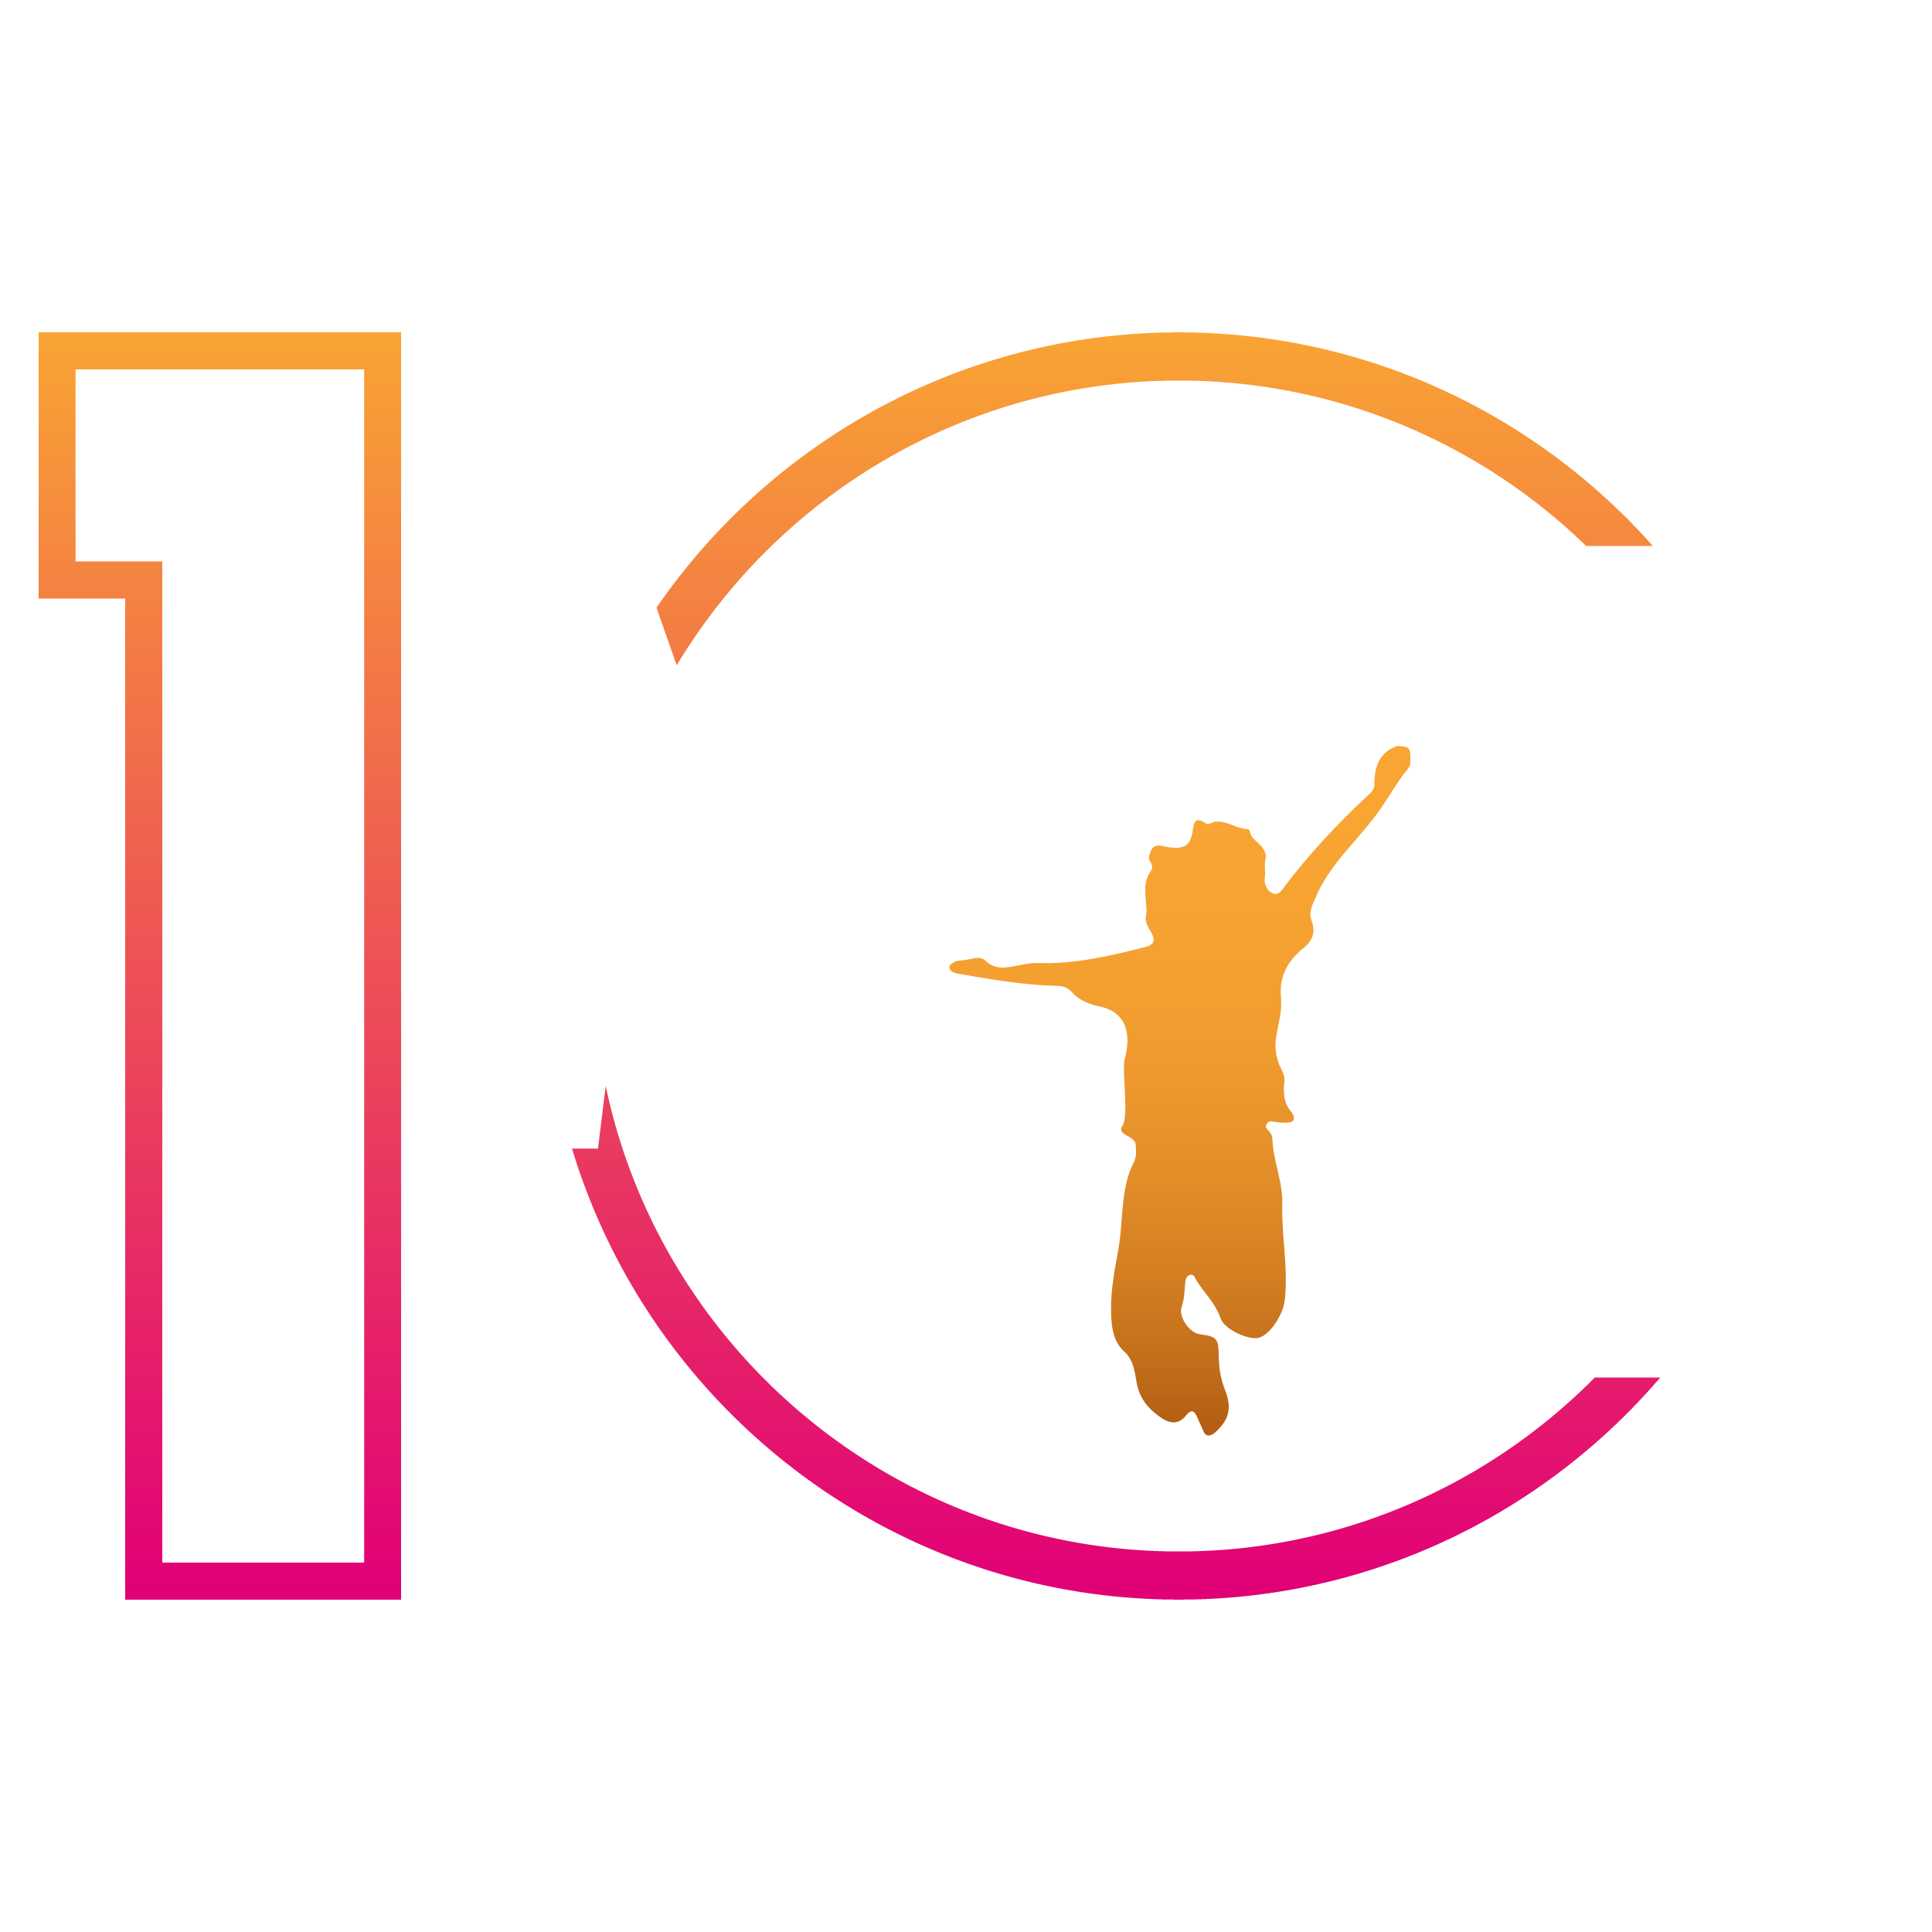 Move to give.